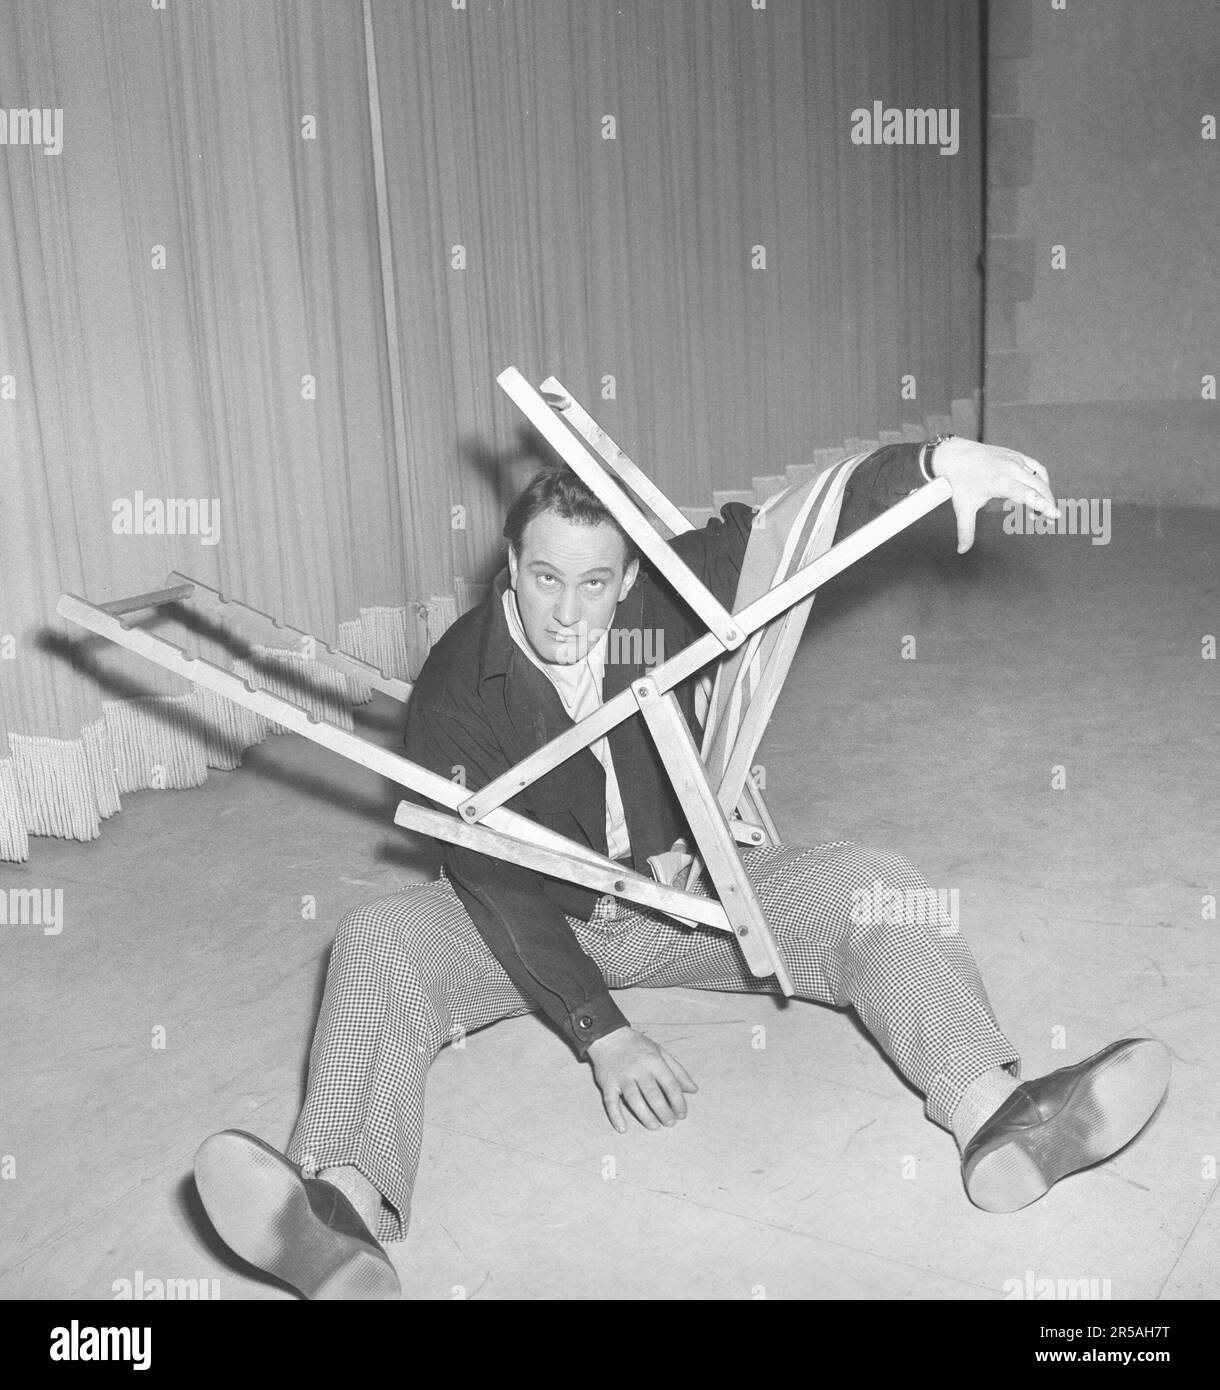 Carl-Gustaf Lindstedt , 1921-1992 , here in connection with a revue in the 1950s where in a classic sketch he tries to put together a deck chair the right way. Doesn't look like he's succeeding. The chair's construction, in its simplicity and genius, is something of a mystery to put together. Sweden 1953. Kristoffersson ref BK100-5 Stock Photo